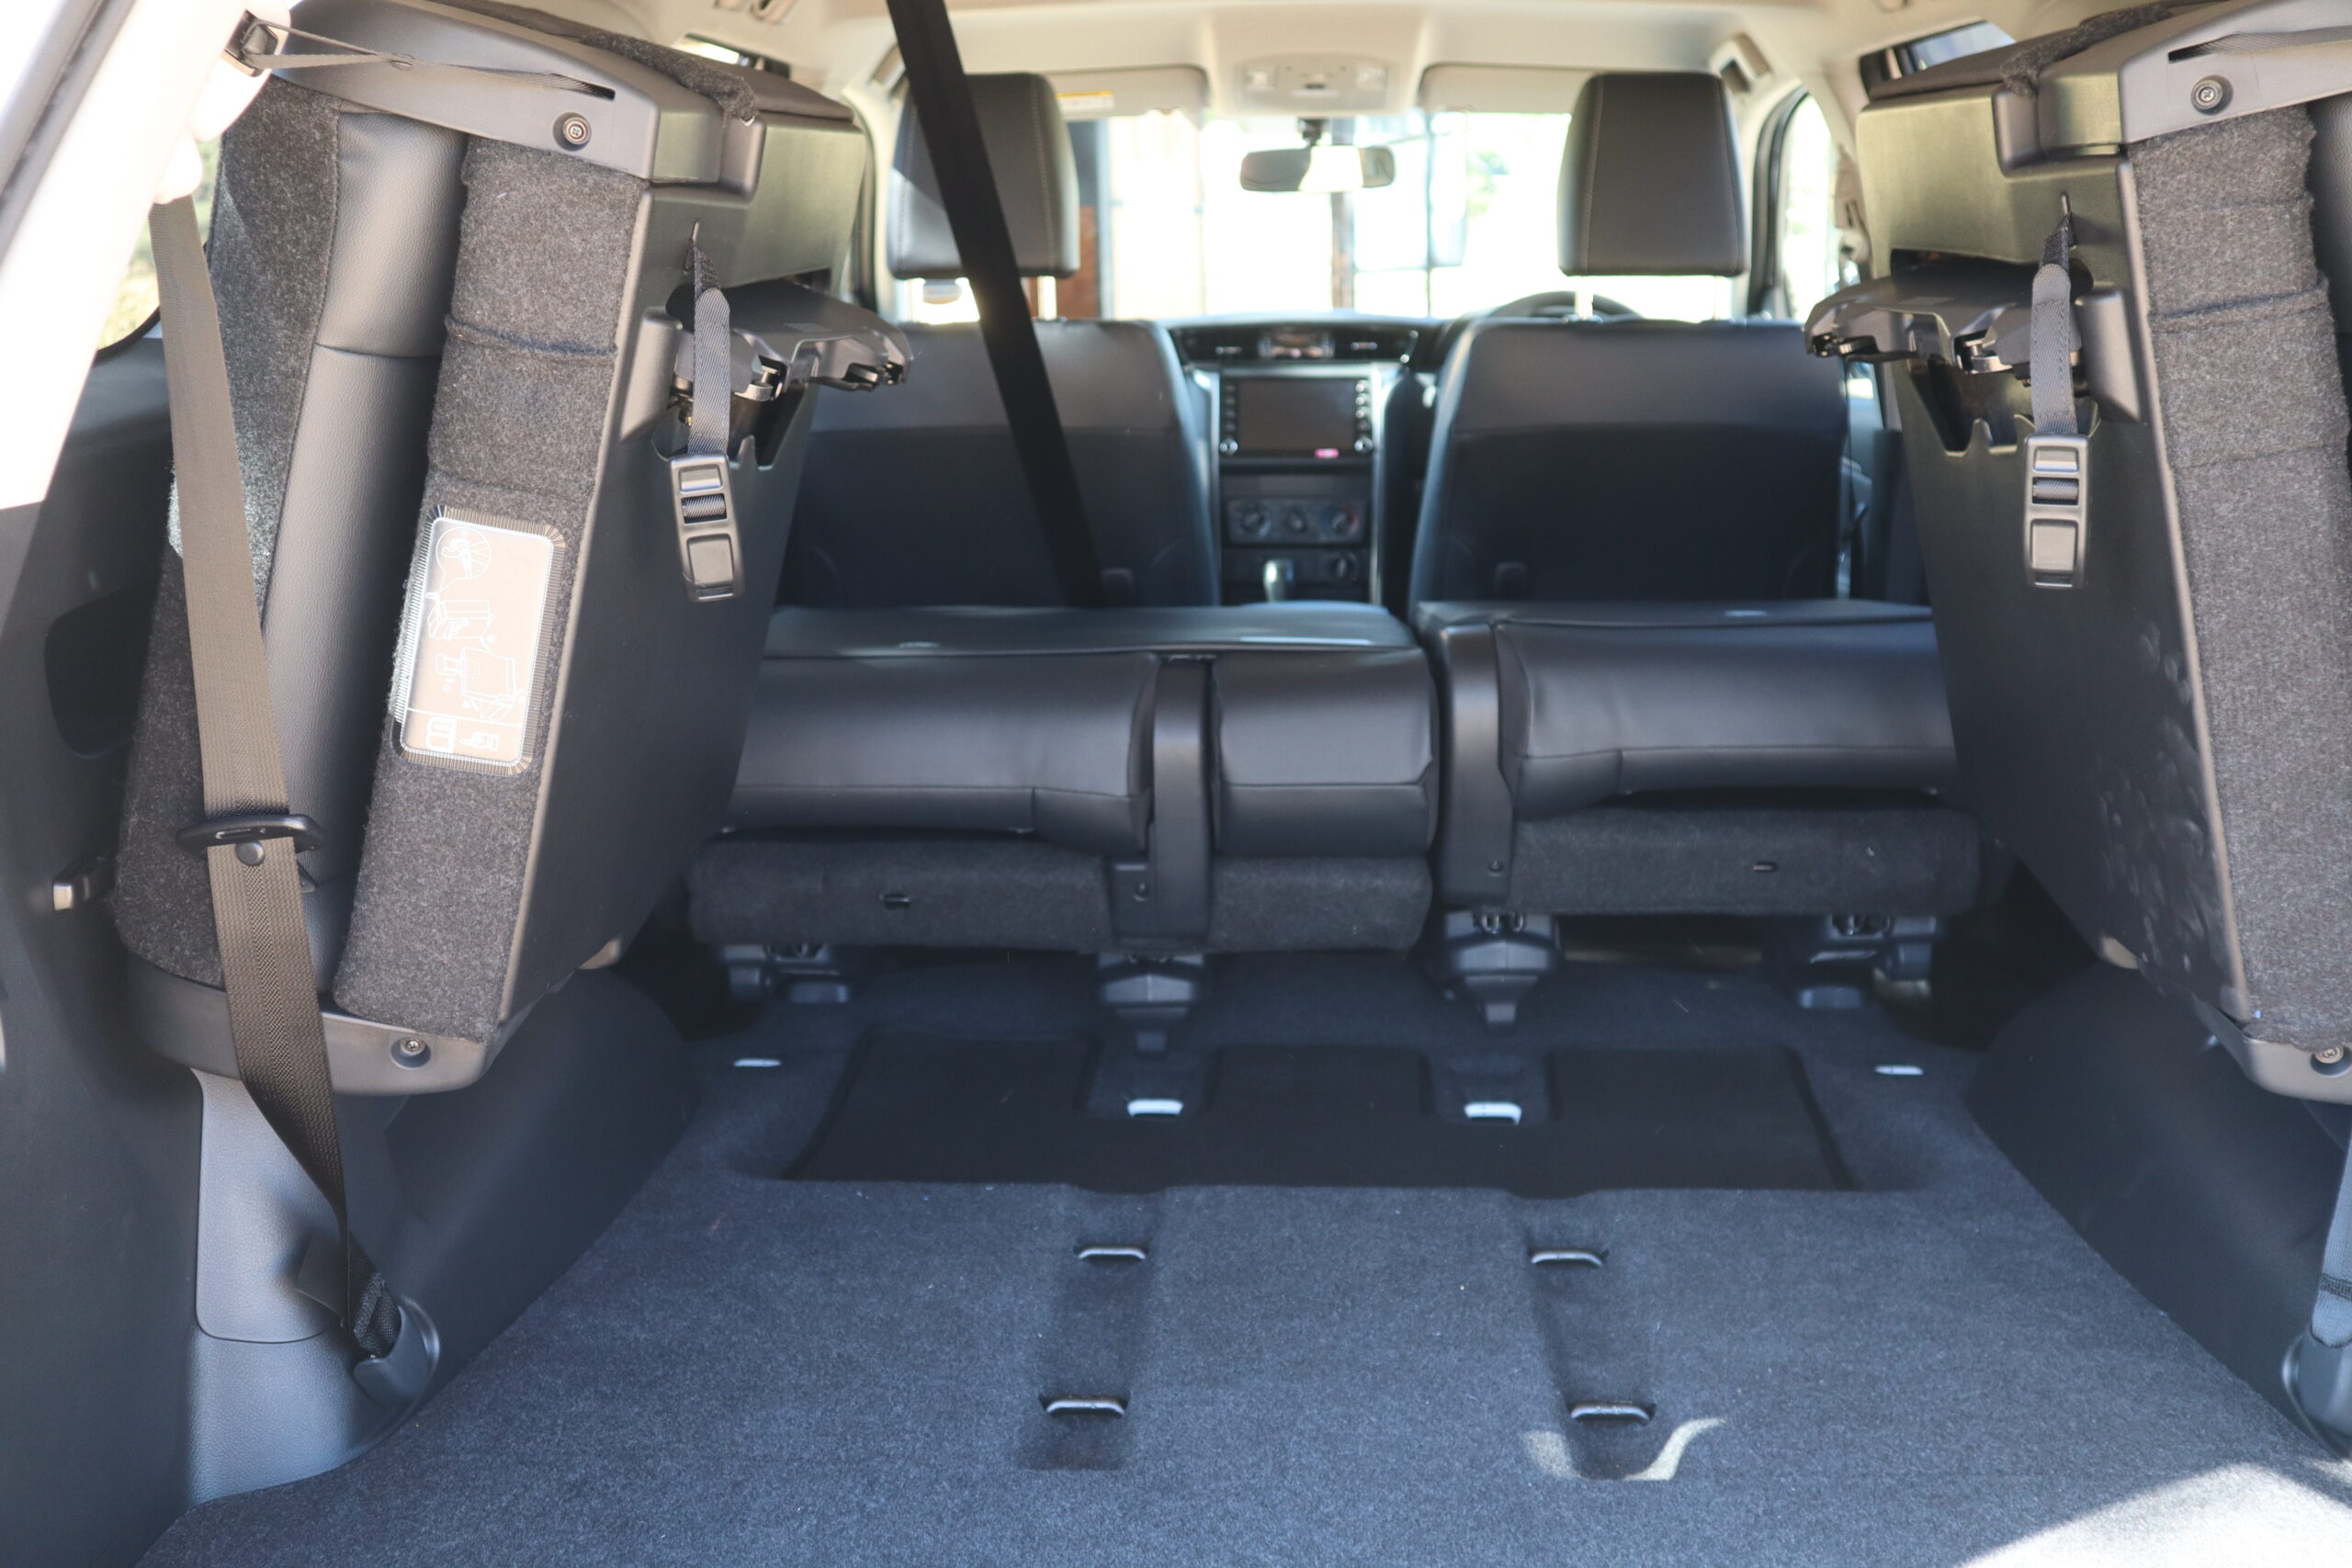 Melbic 4x4 Car Rentals Namibia Toyota Fortuner Trunk with folded up seats